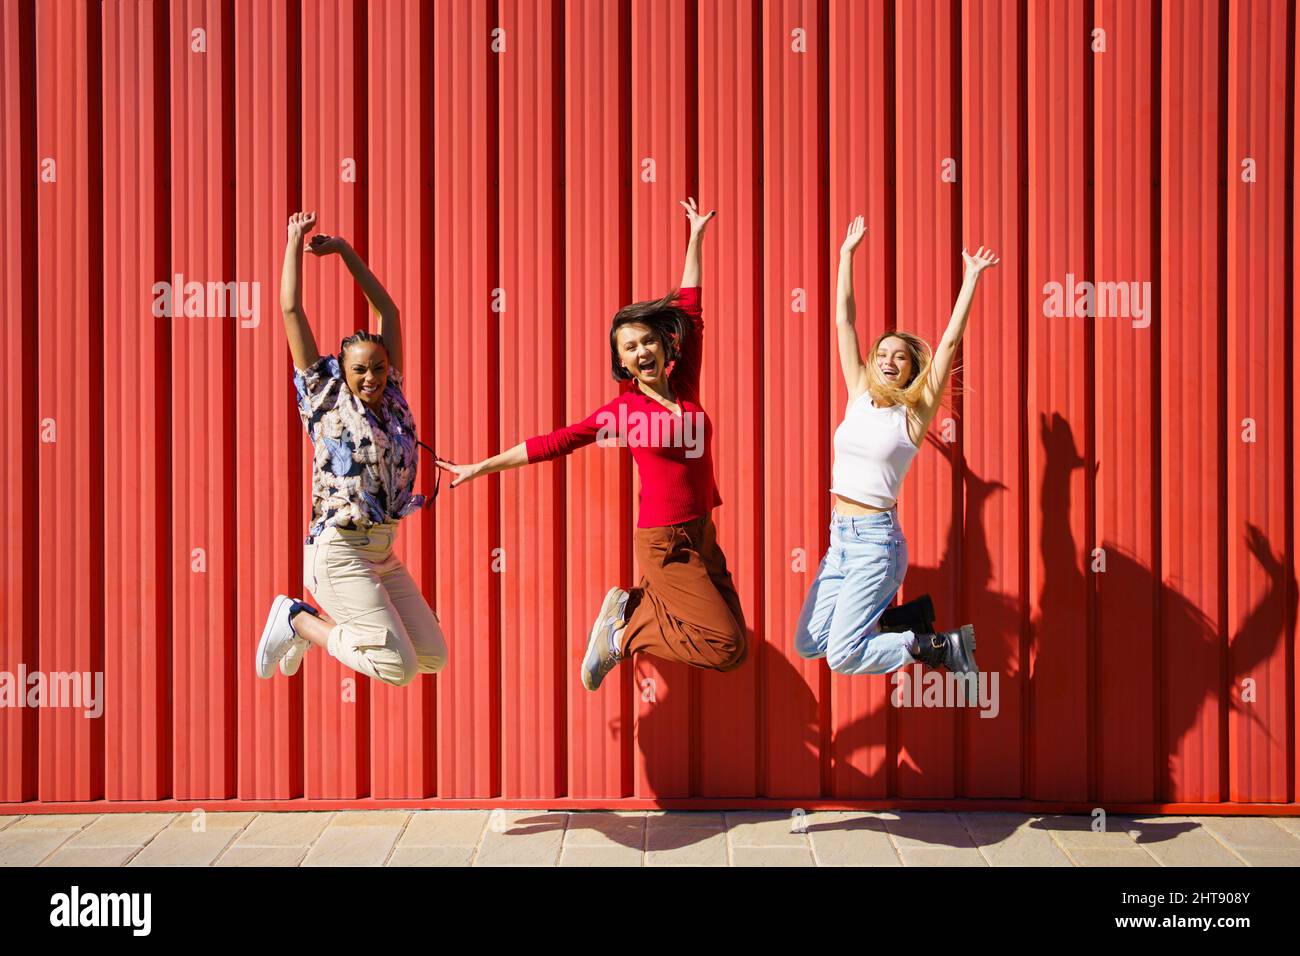 Delighted women jumping near wall Stock Photo